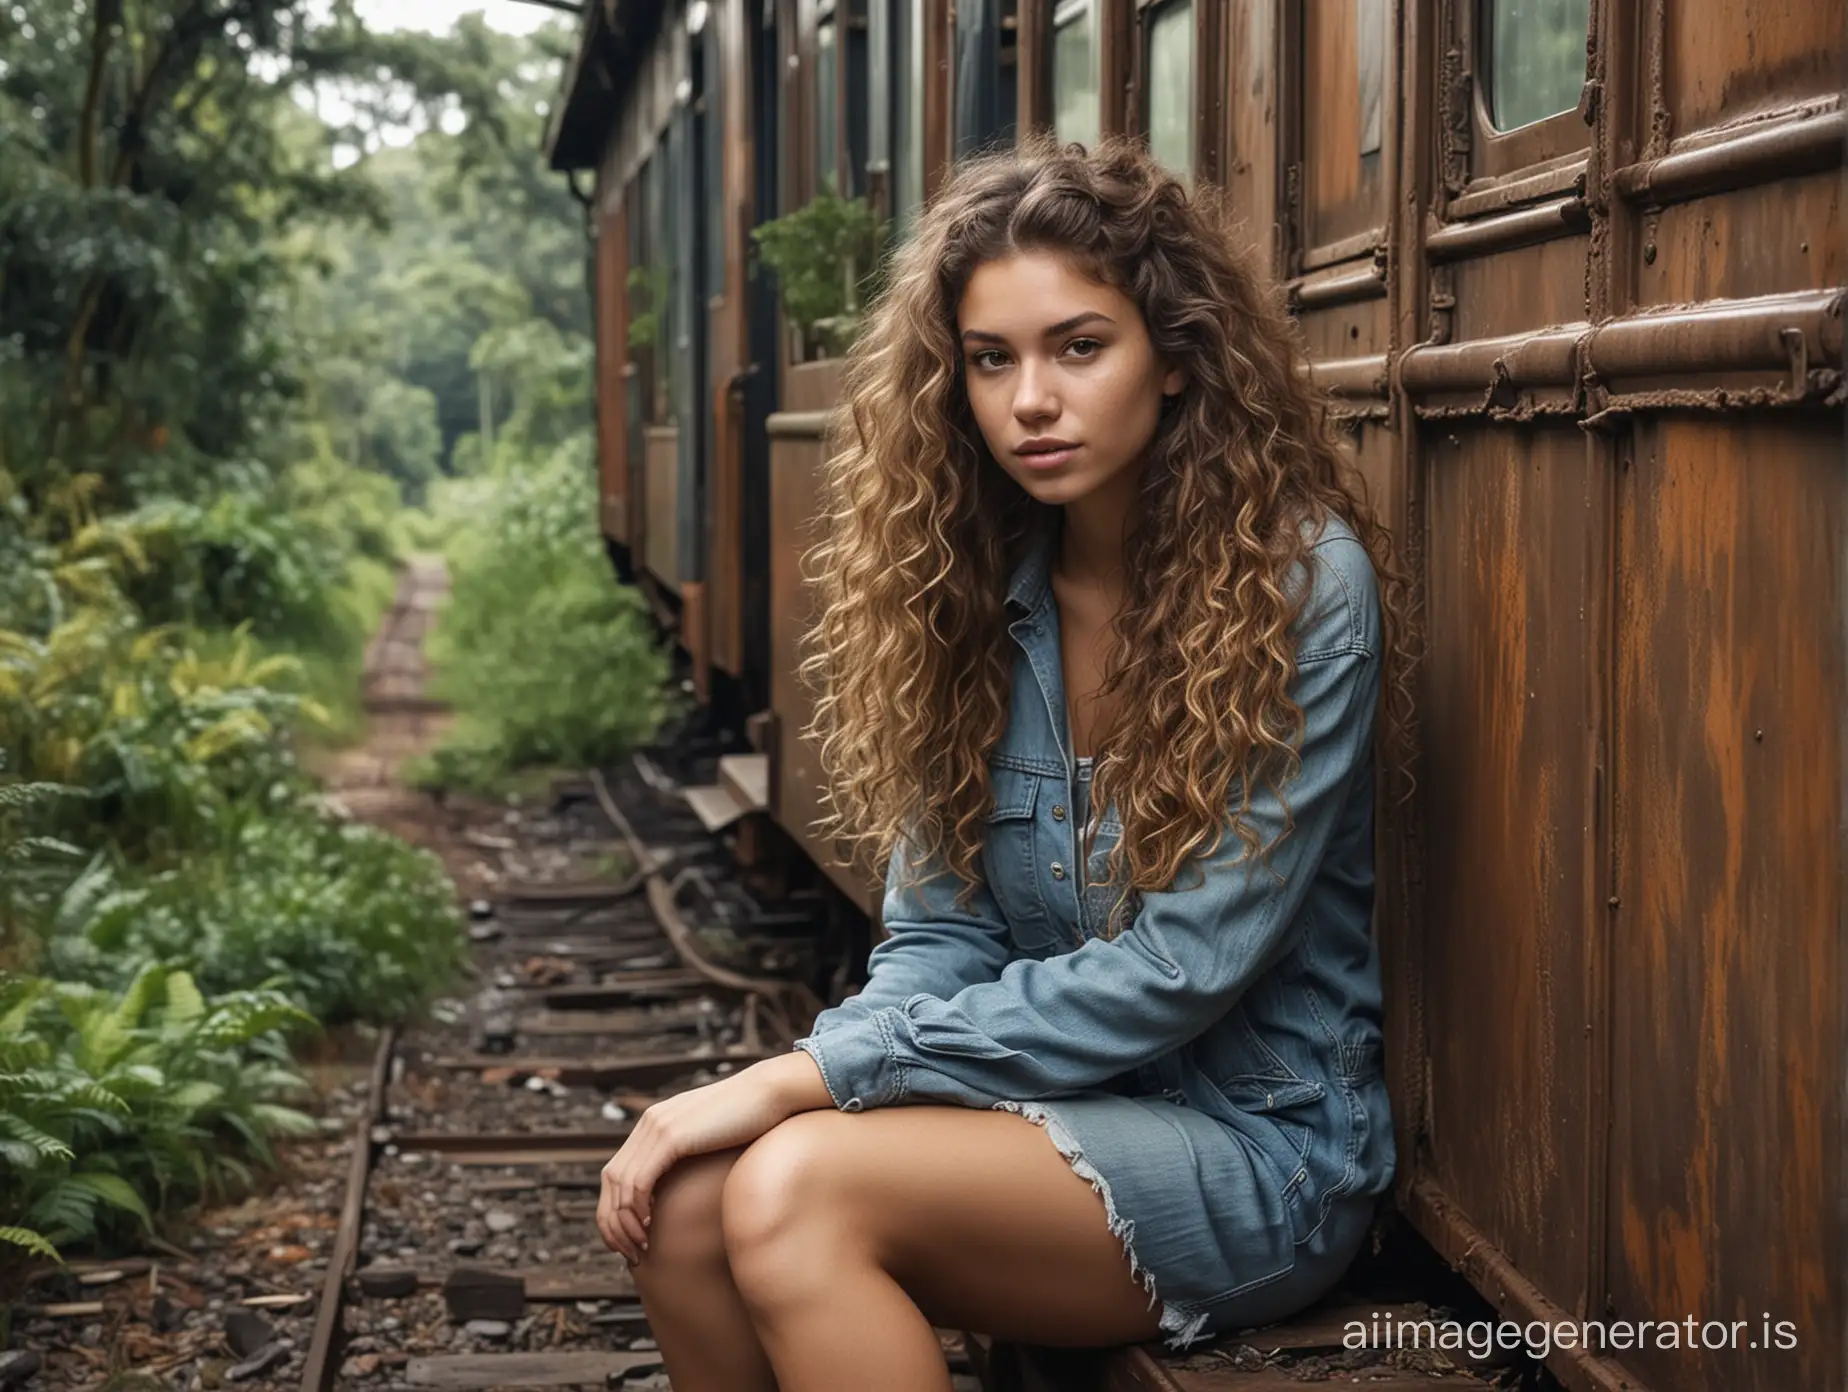 make a very realistic potrait of a beautifull girl, curly long hair, casual clothes, sitting in the doorway of a stopped train carriage, the train carriage is damaged and dusty and overgrown with bushes and moss, background is an old unused train station in the rainforest, cloudy weather.